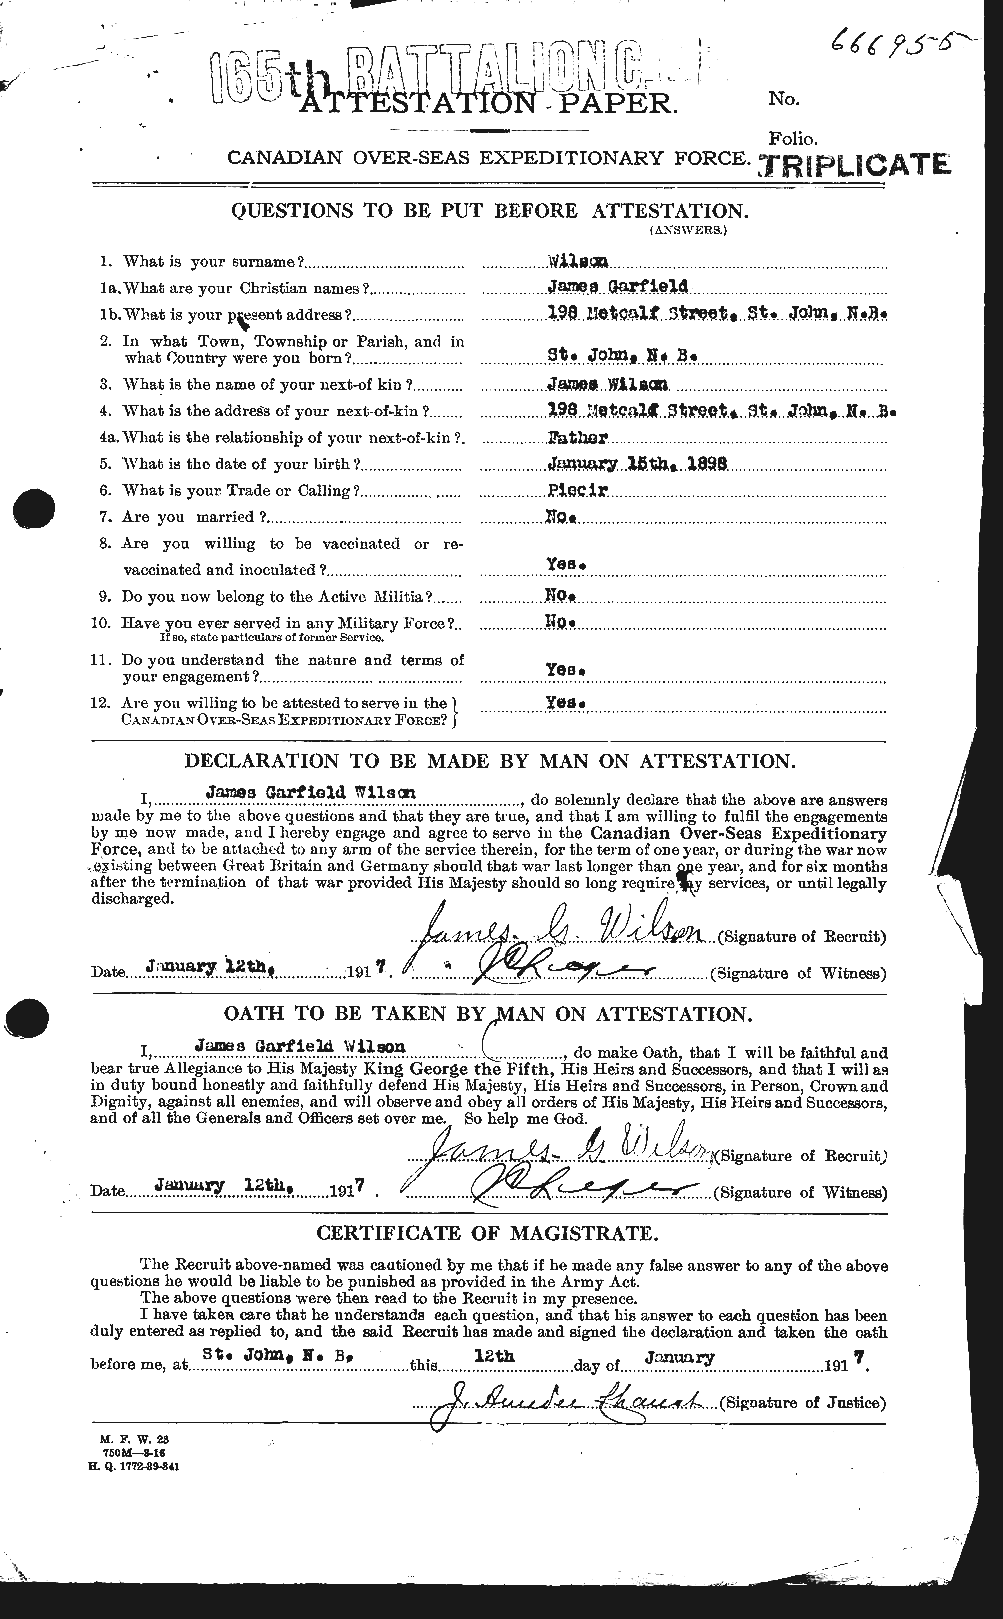 Personnel Records of the First World War - CEF 681456a